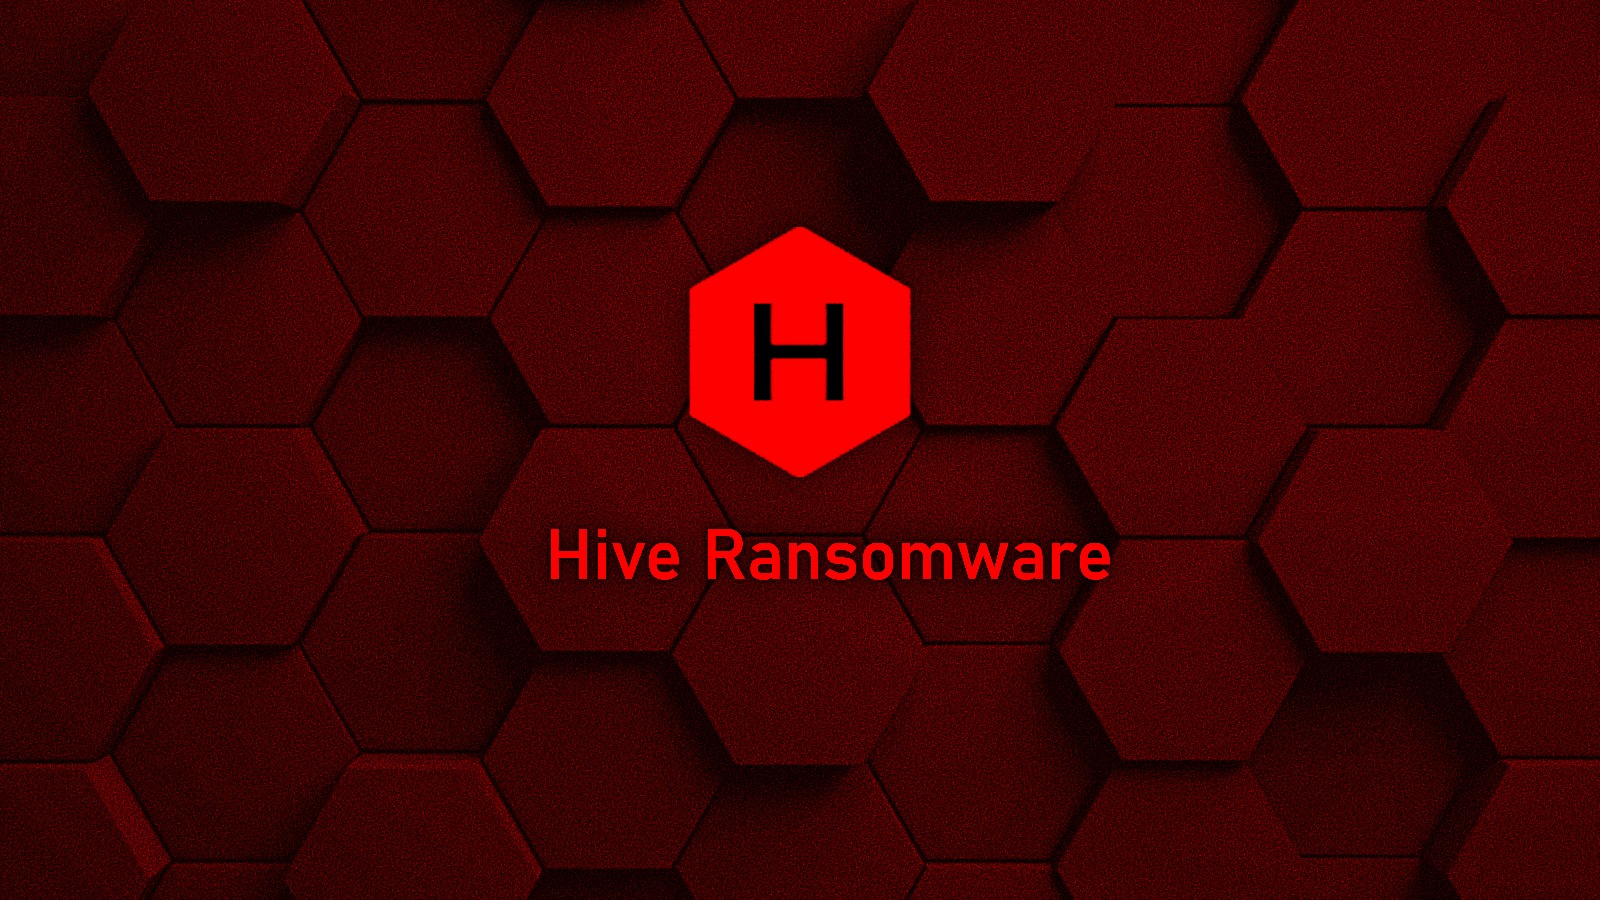 Hive ransomware is hacking Exchange servers with ProxyShell exploits